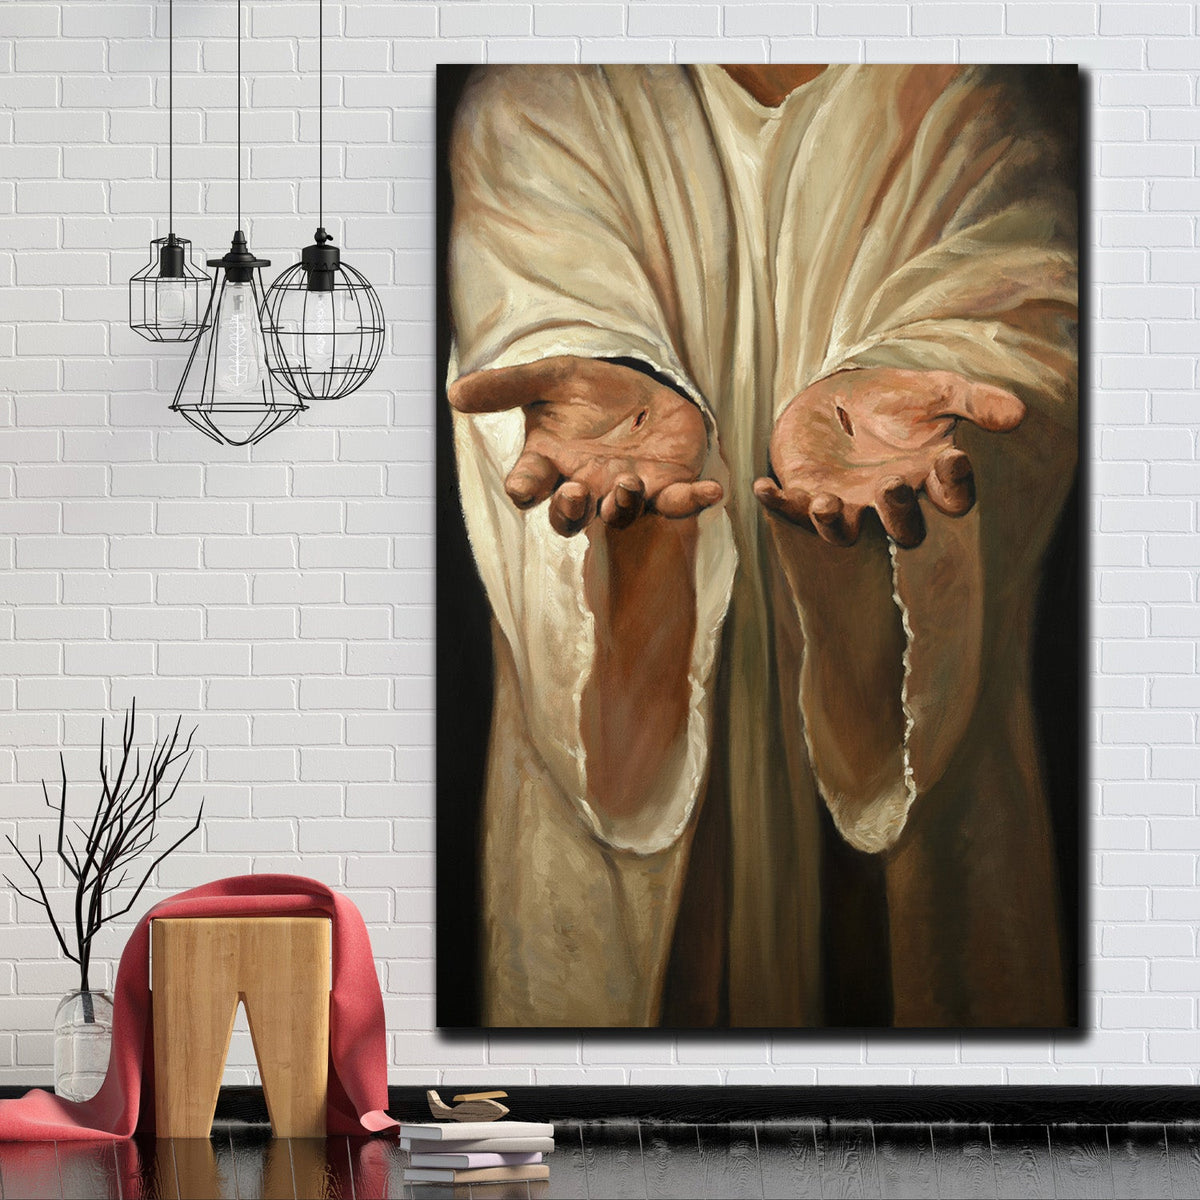 https://cdn.shopify.com/s/files/1/0387/9986/8044/products/TheHandsofJesusCanvasArtprintStretched-2.jpg